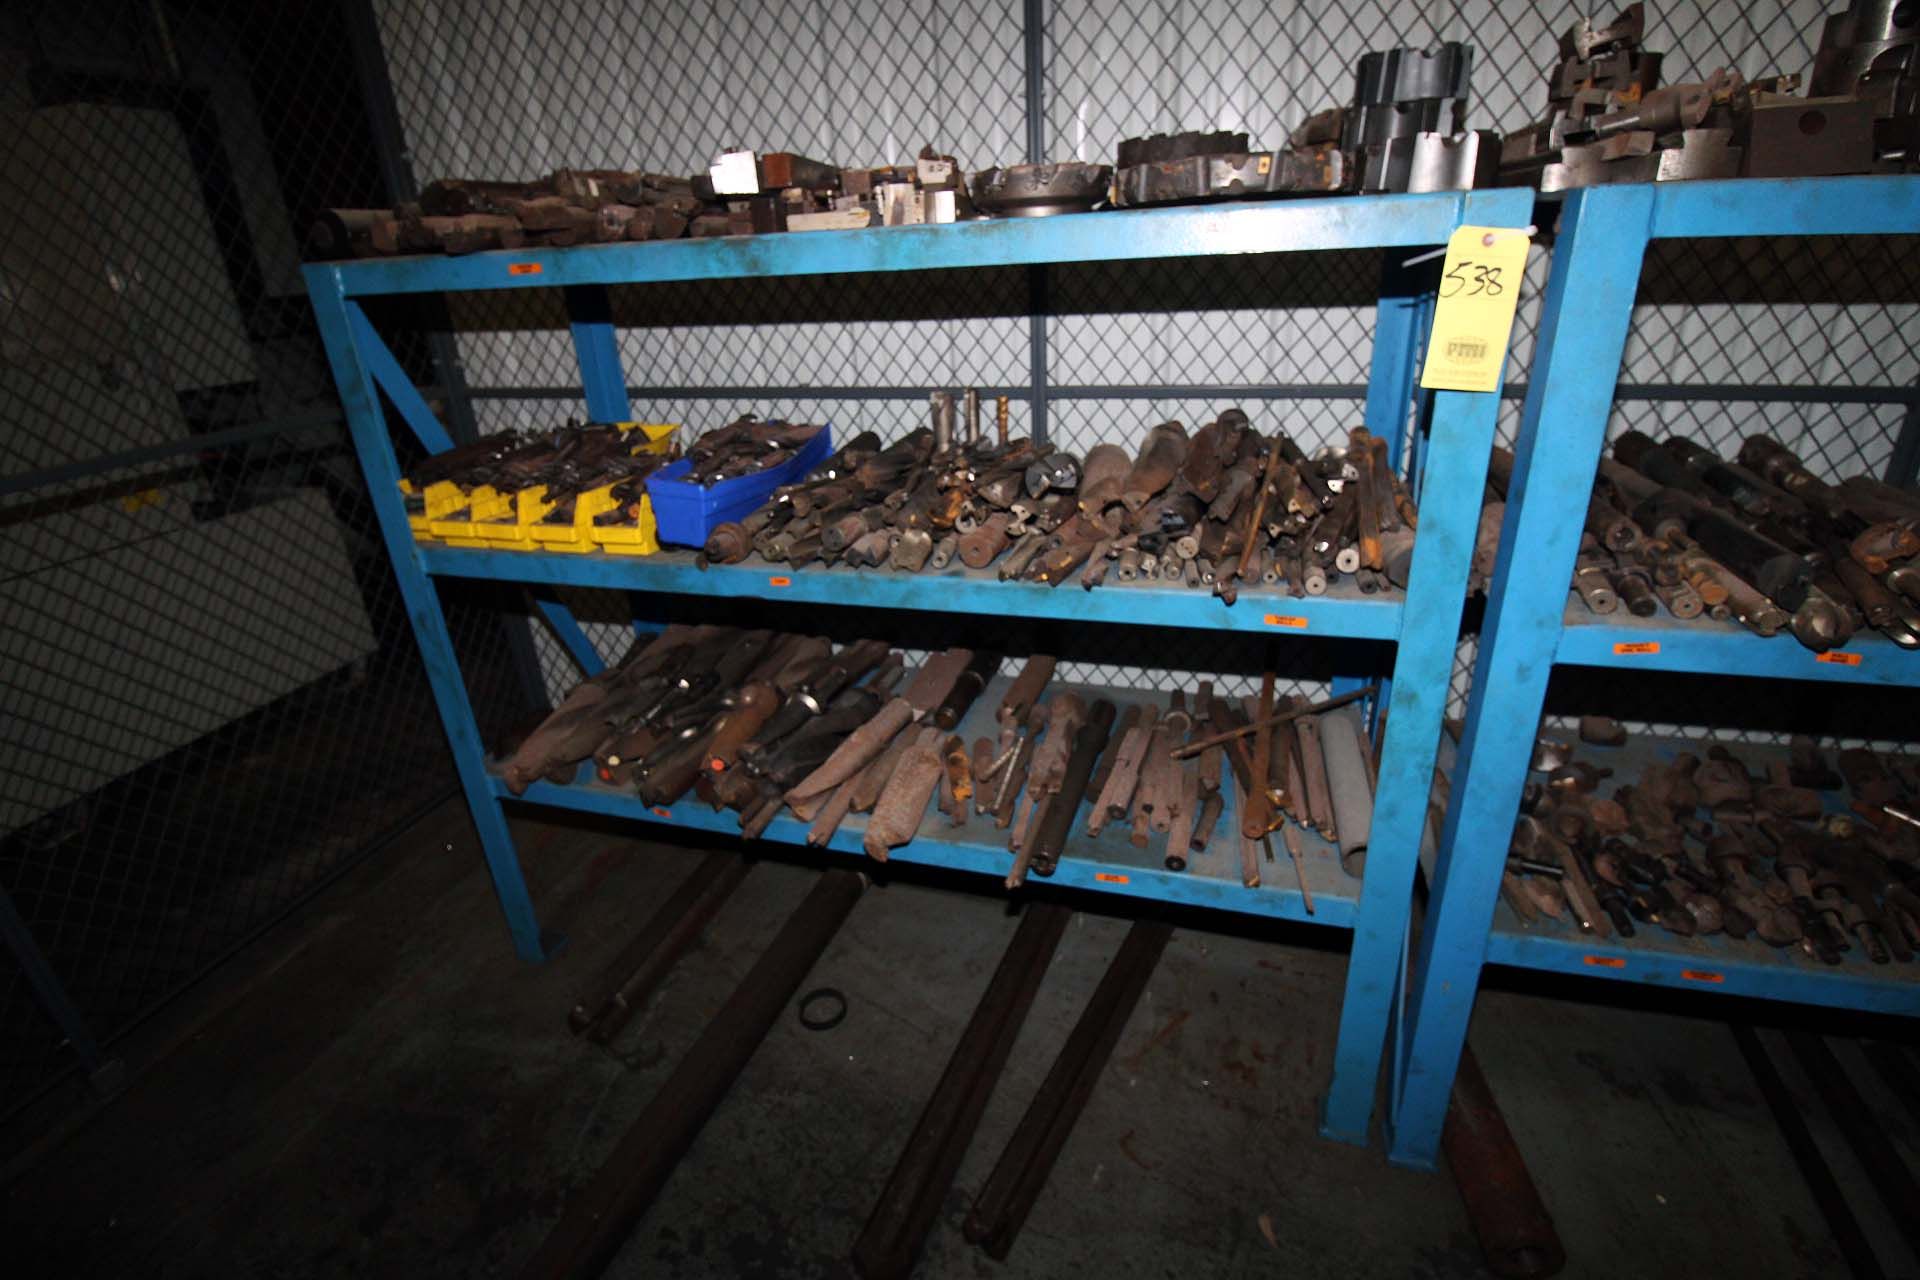 LOT CONSISTING OF: 25" x 64" x 55" ht. shelf & contents, drills, facemills, taps, inserted drills,